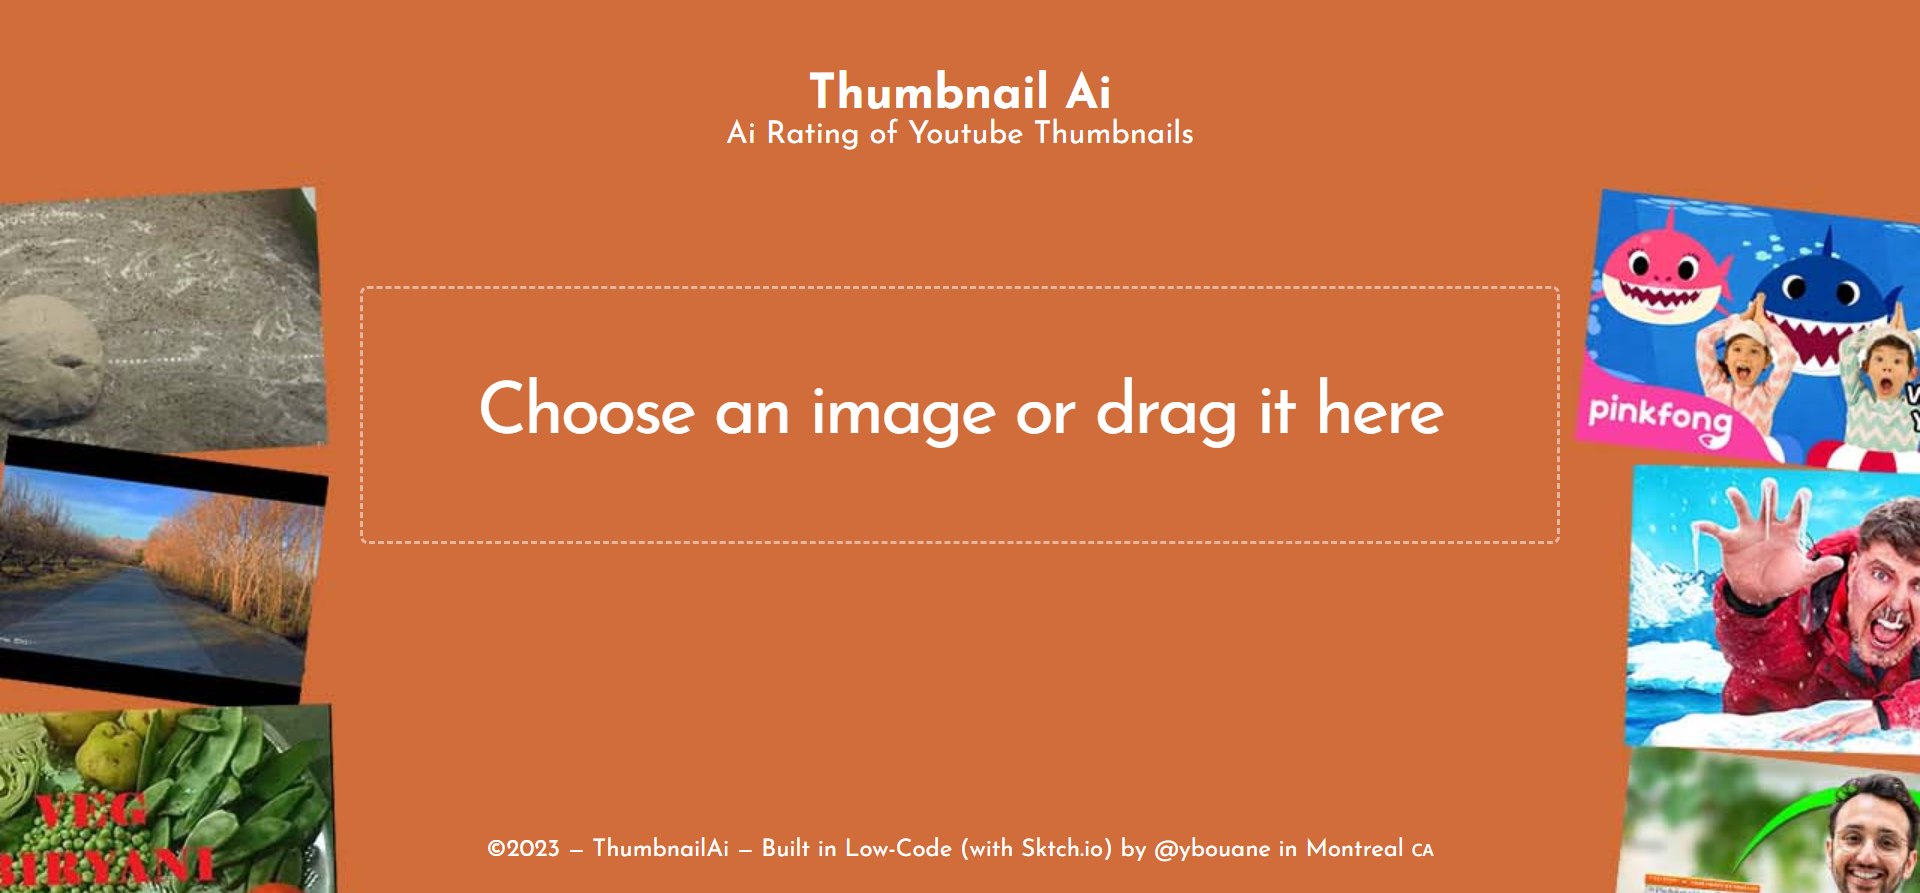 Maximize Your Views with Thumbnail-ai.ybouane.com’s Powerful Rating System